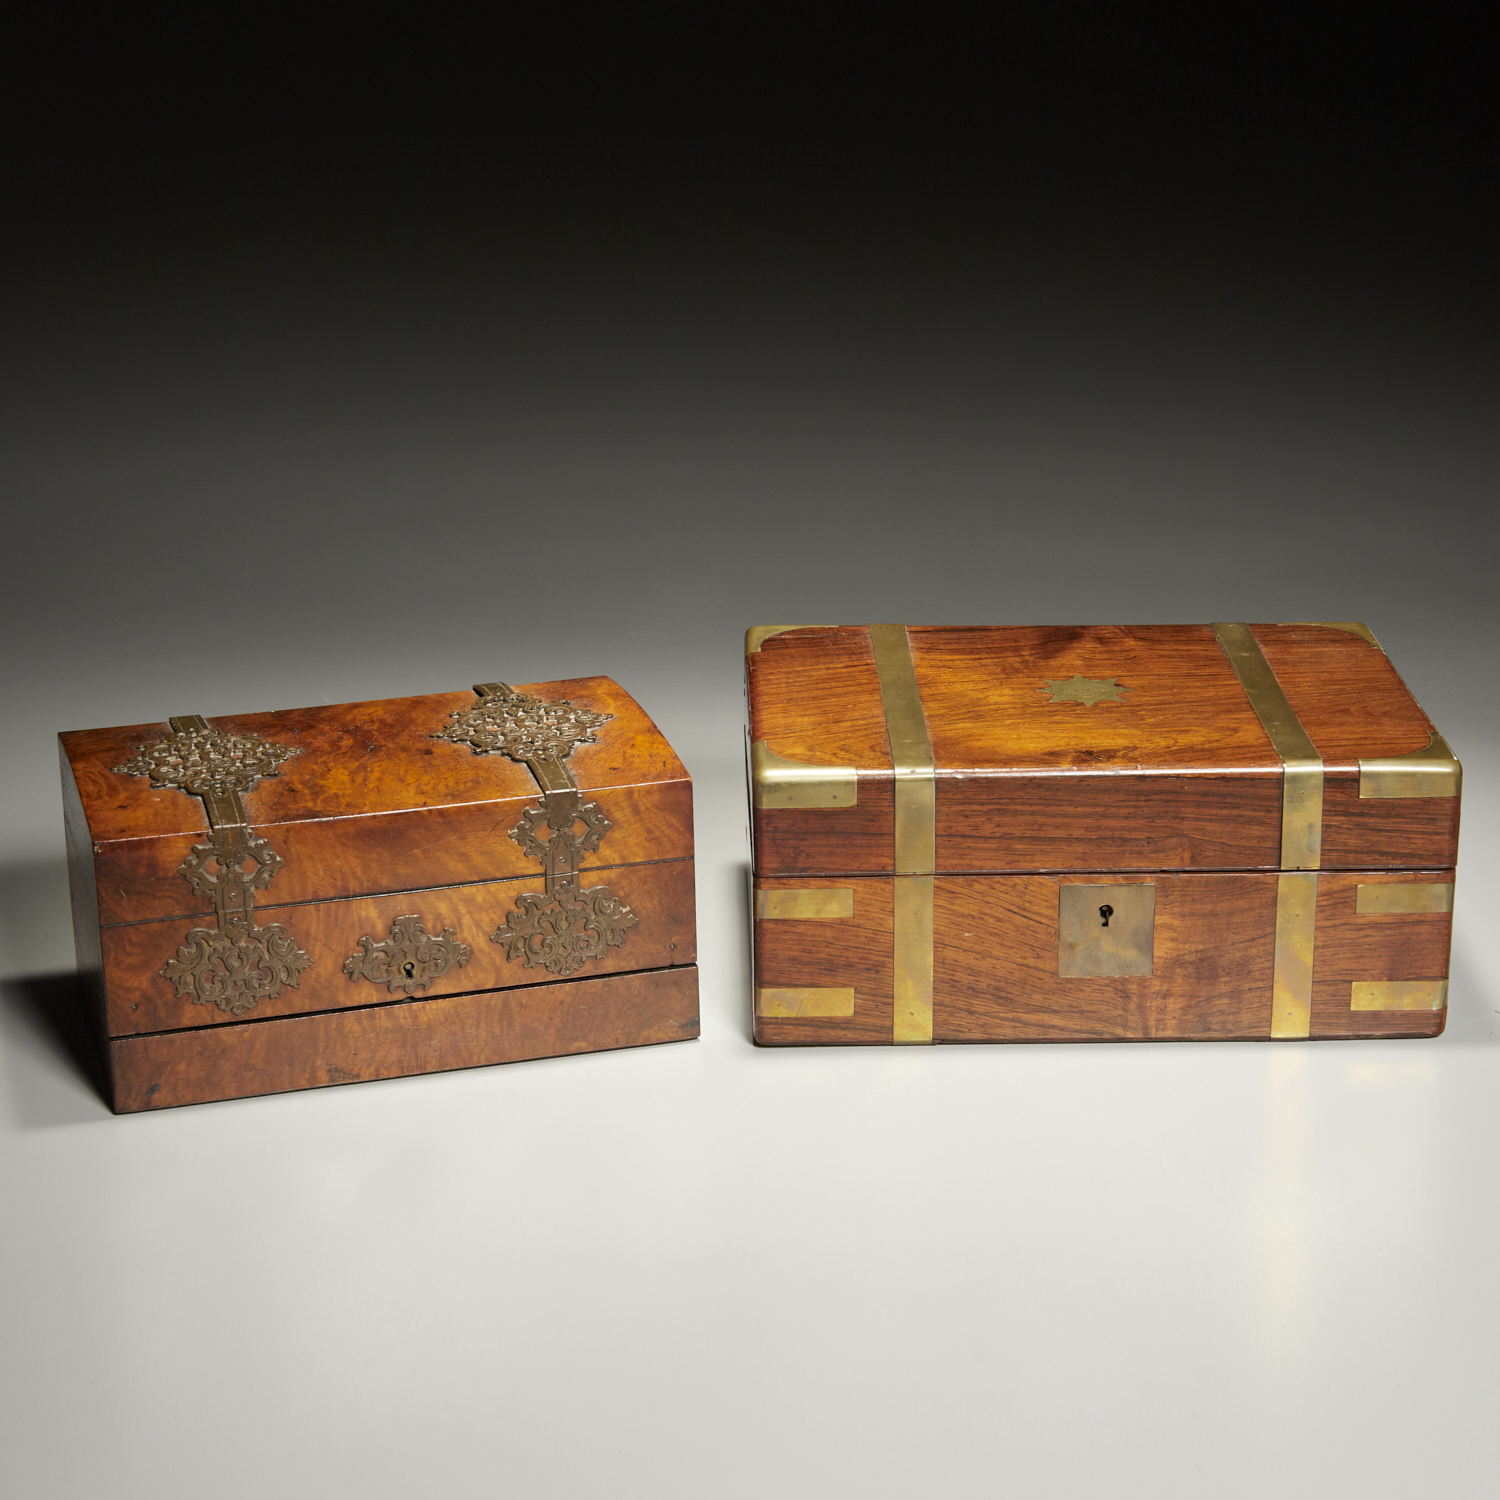 VICTORIAN JEWELRY BOX AND CAMPAIGN